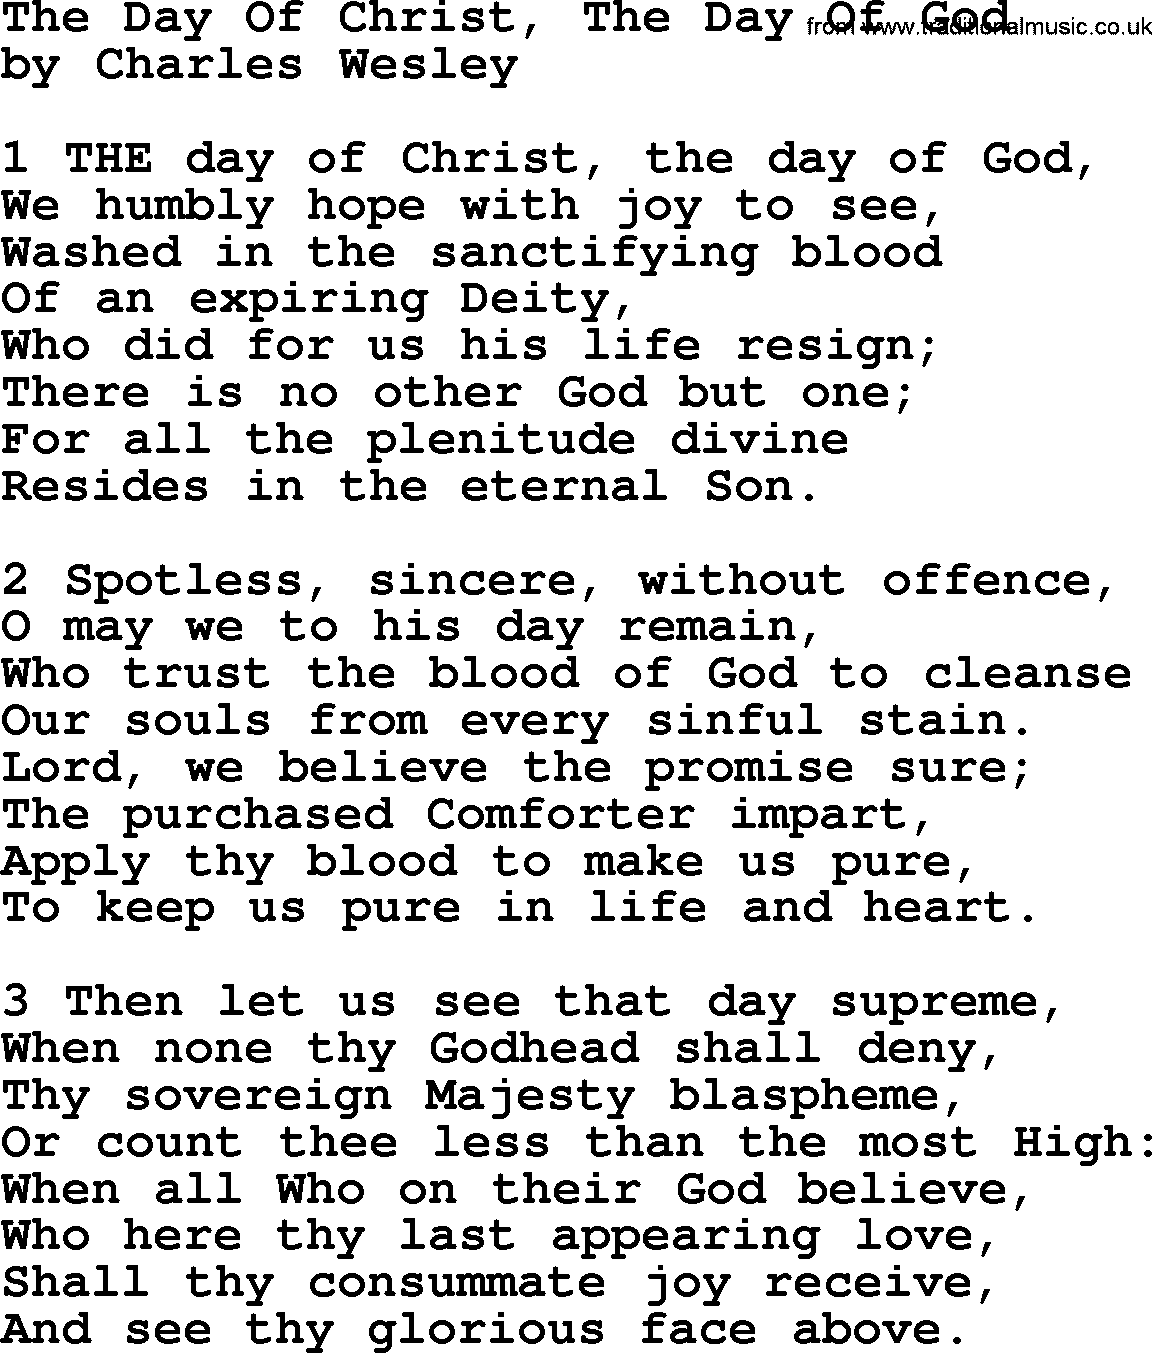 Charles Wesley hymn: The Day Of Christ, The Day Of God, lyrics